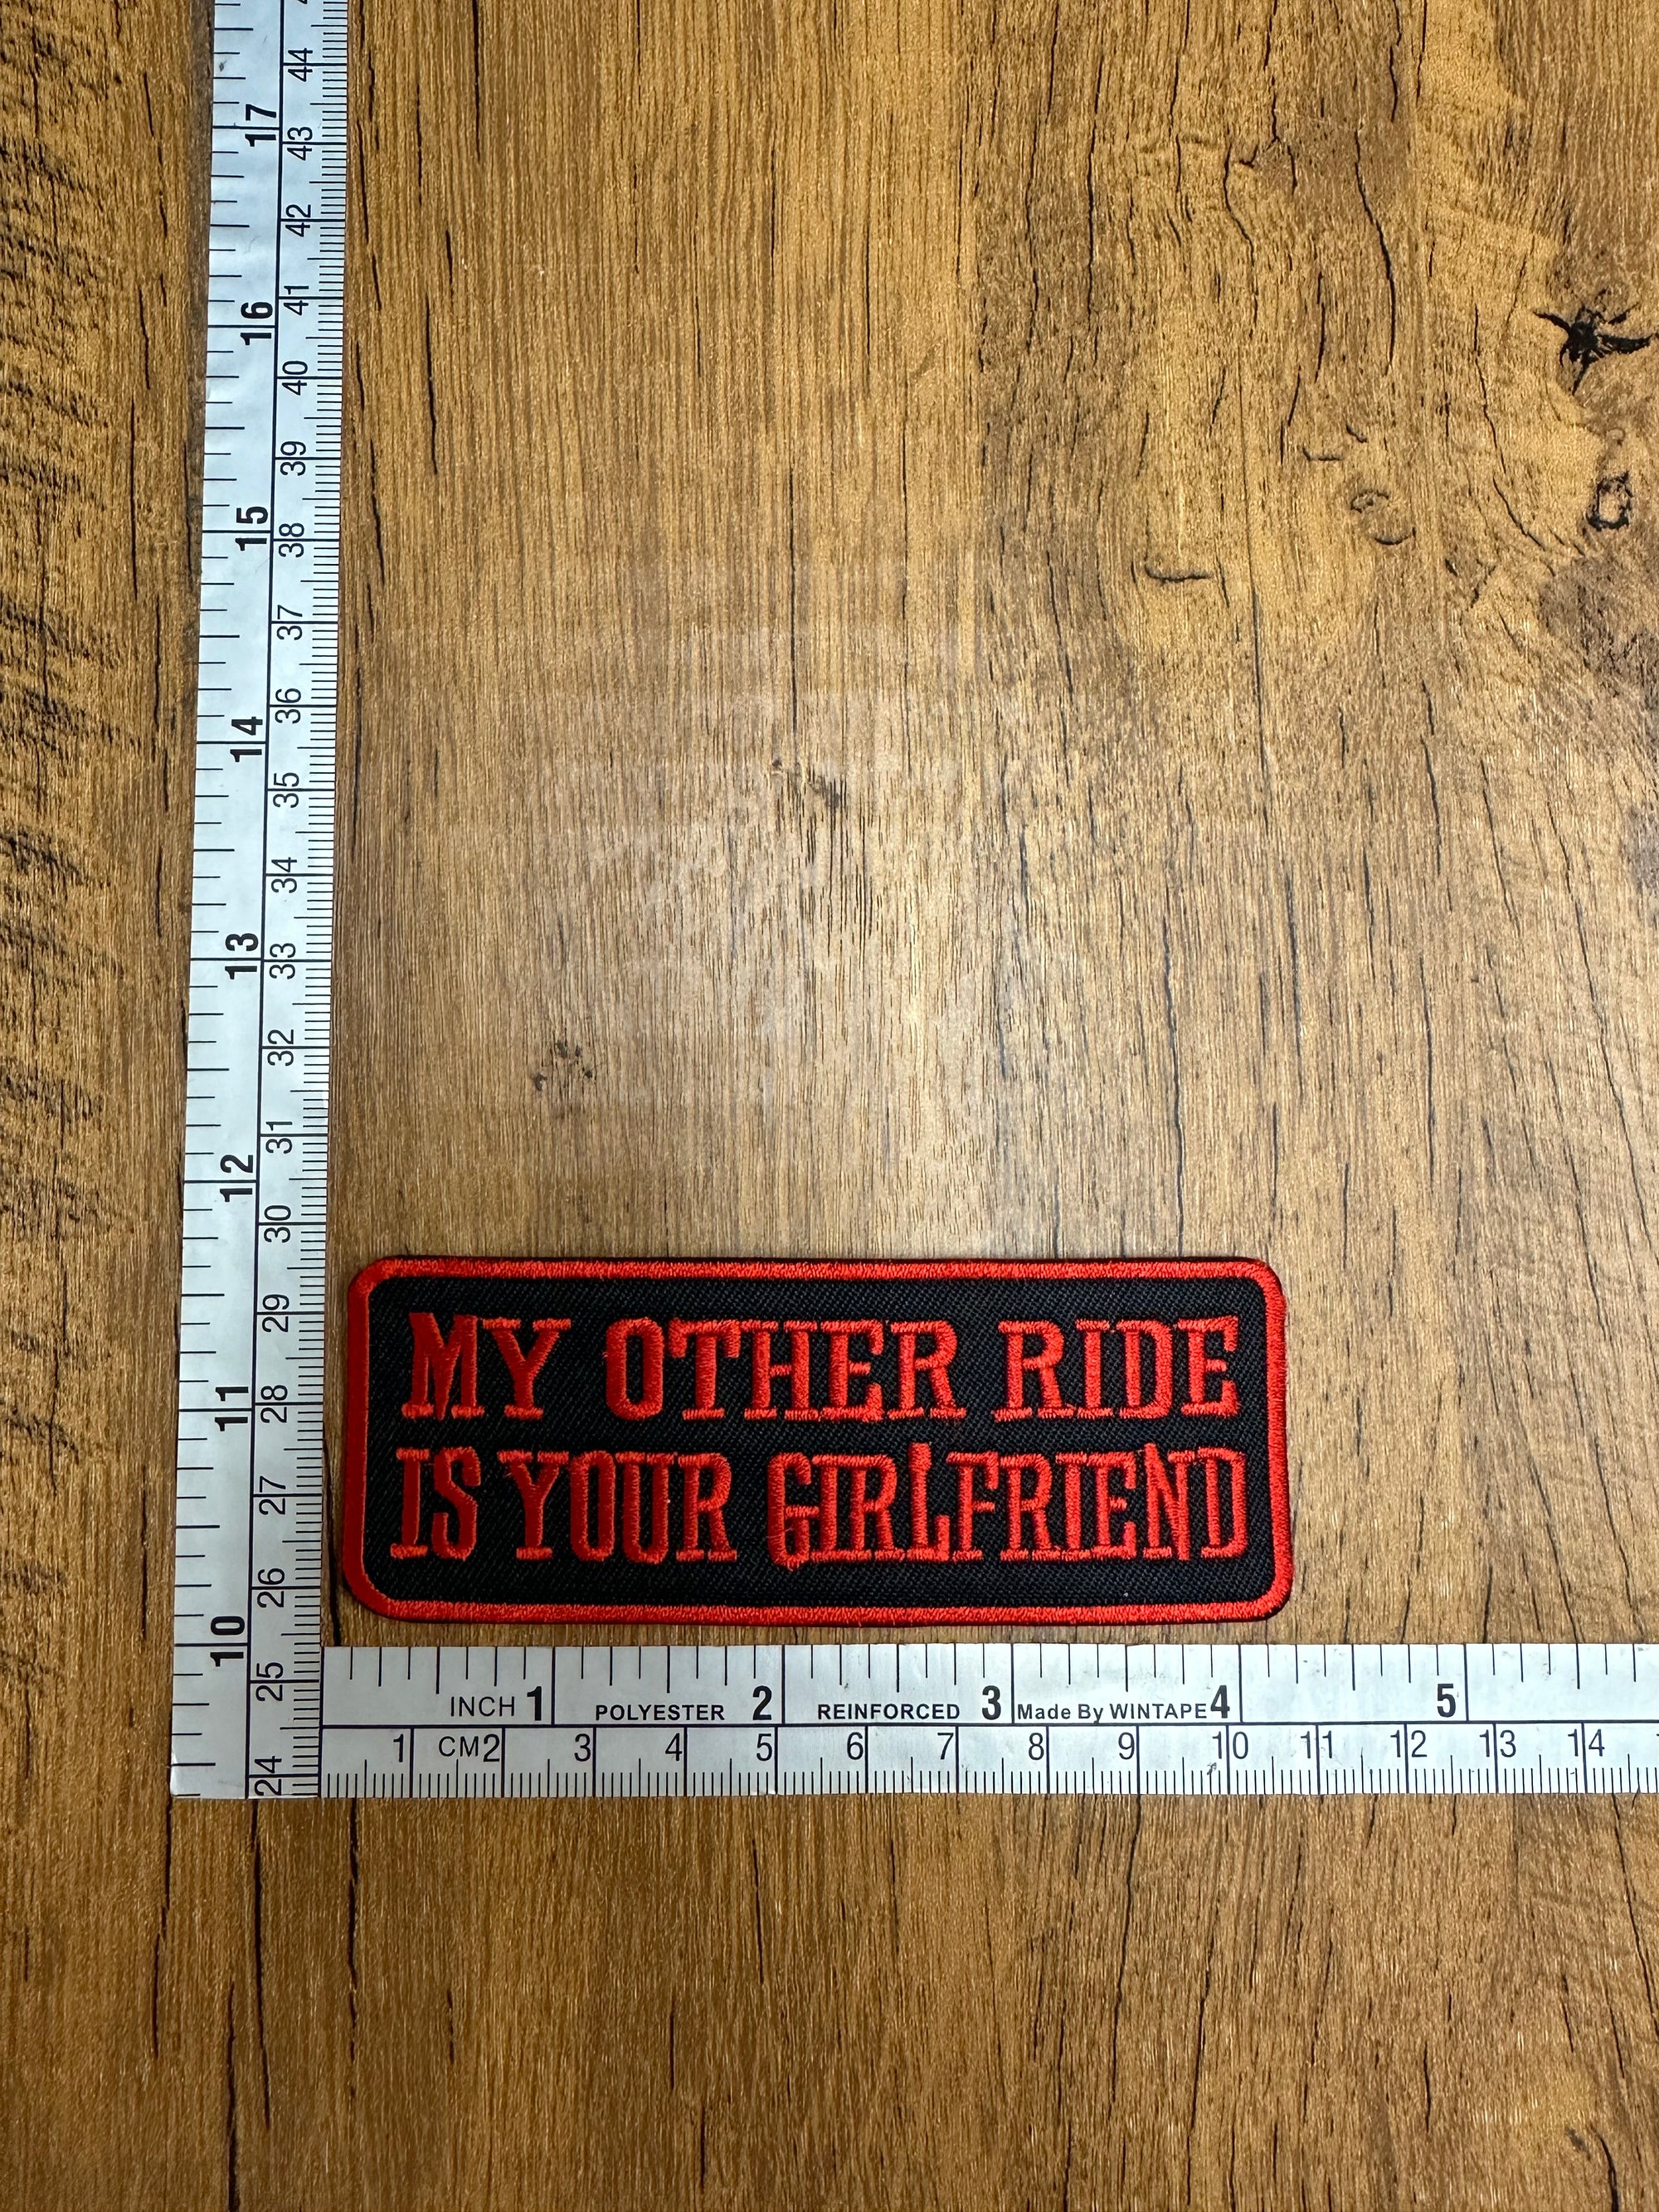 My Other Ride Is Your Girlfriend